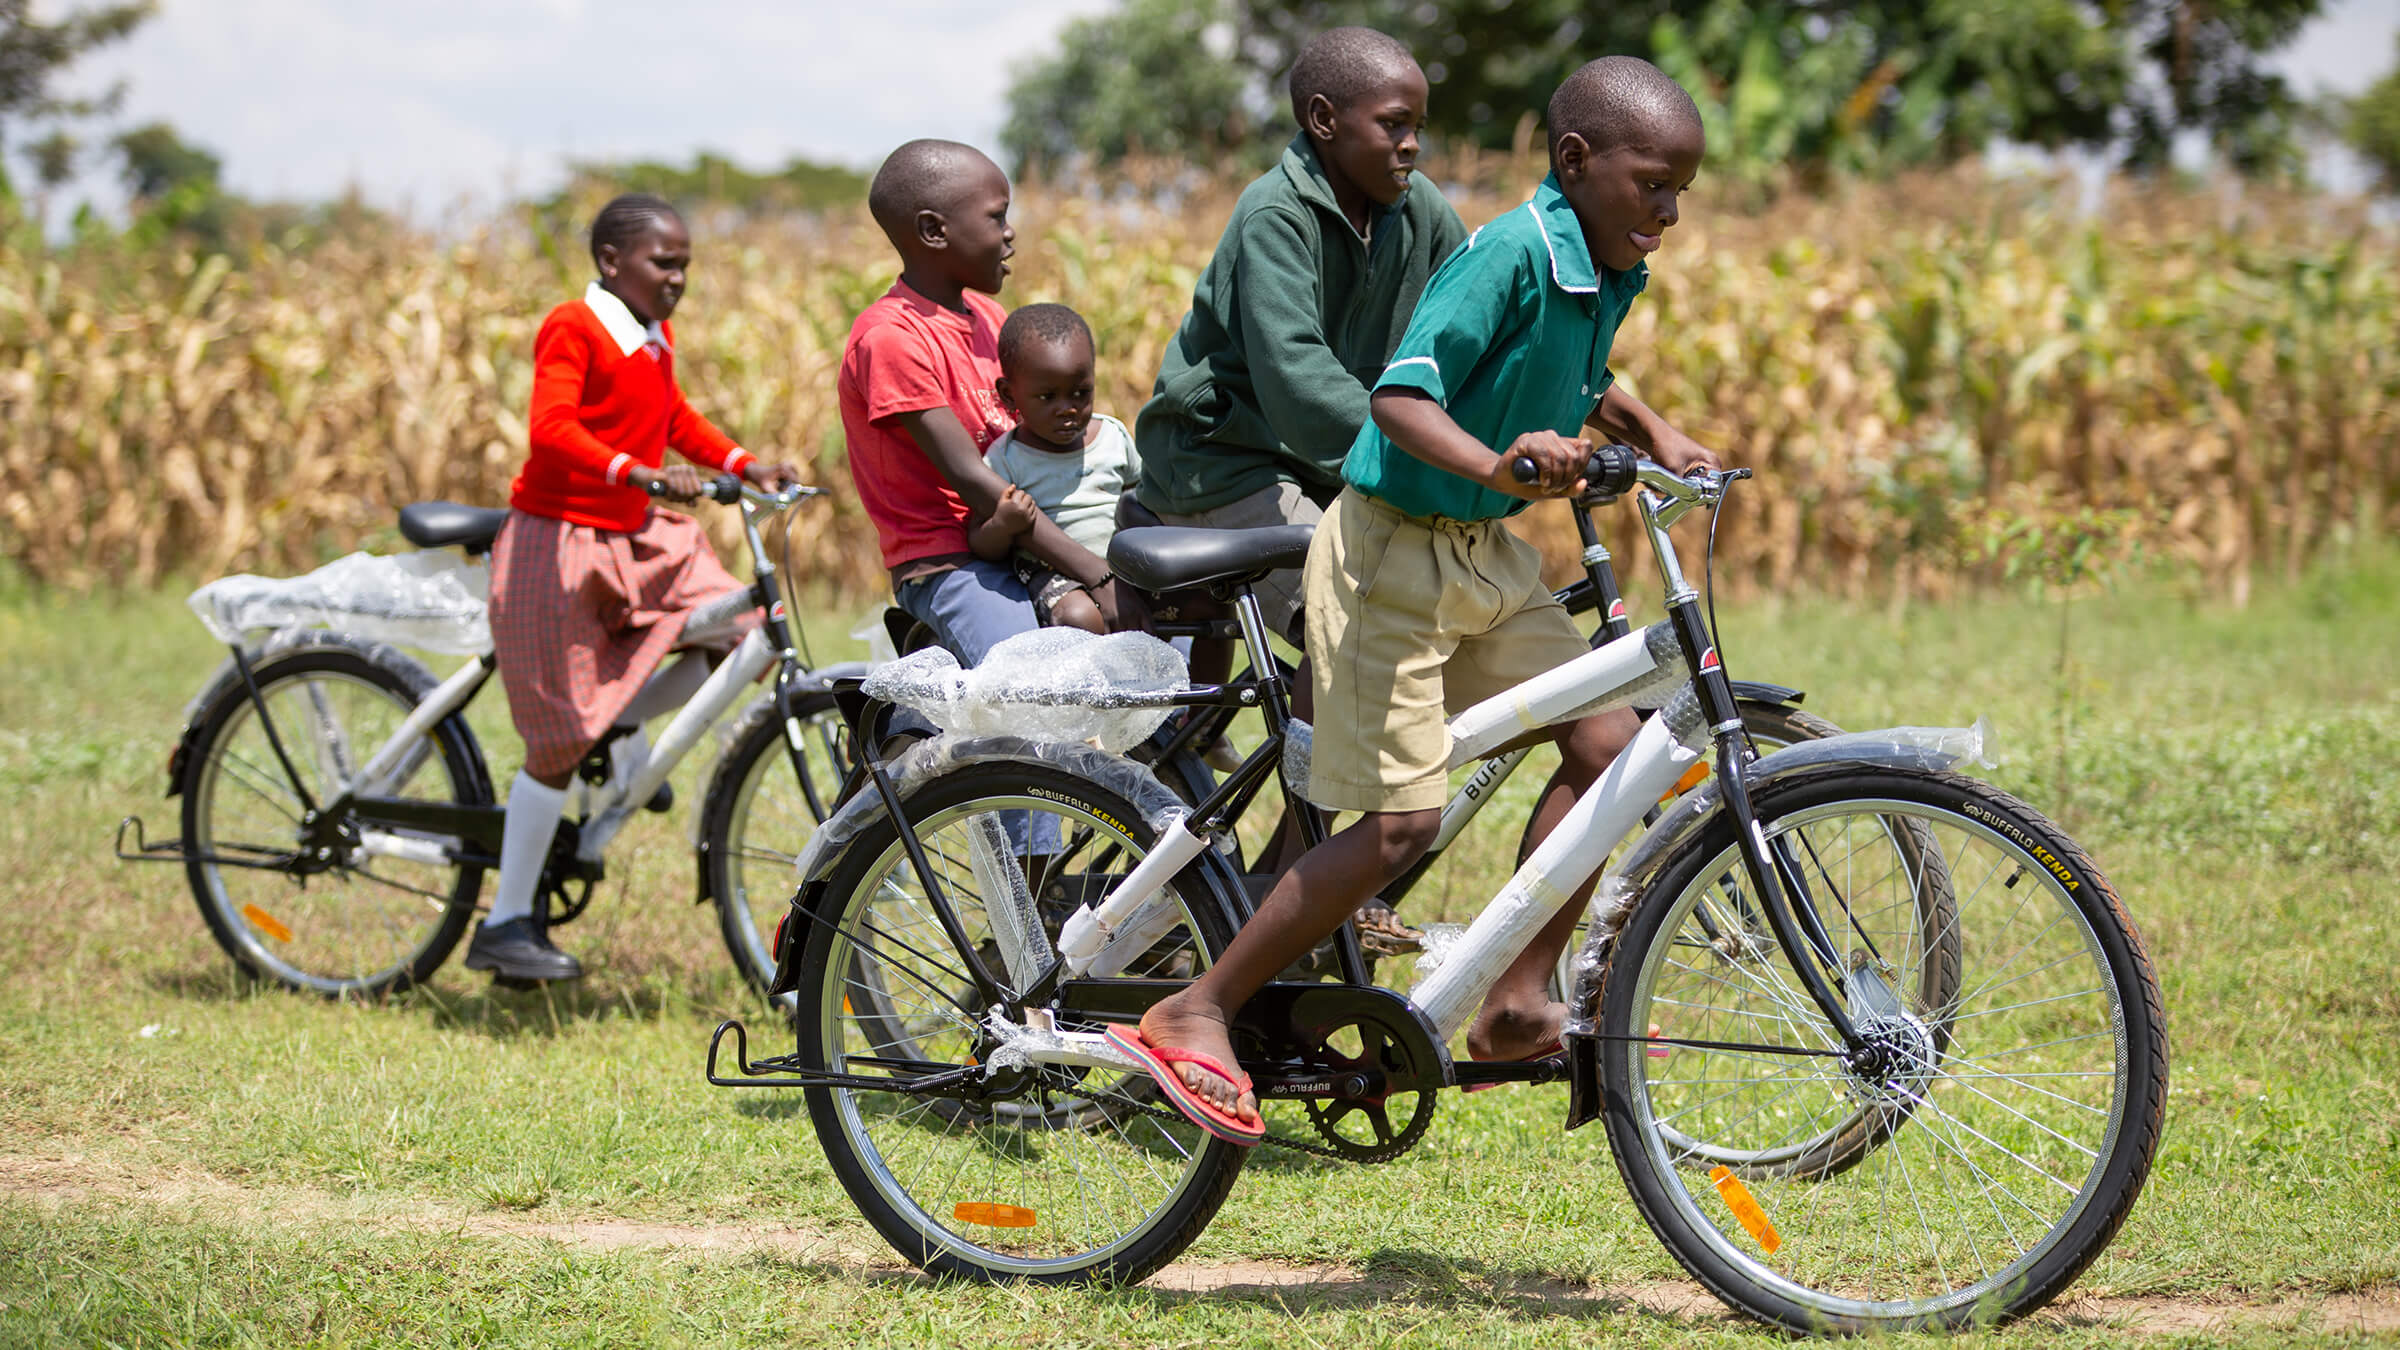 A gorup of students in Kenya race their new bikes.